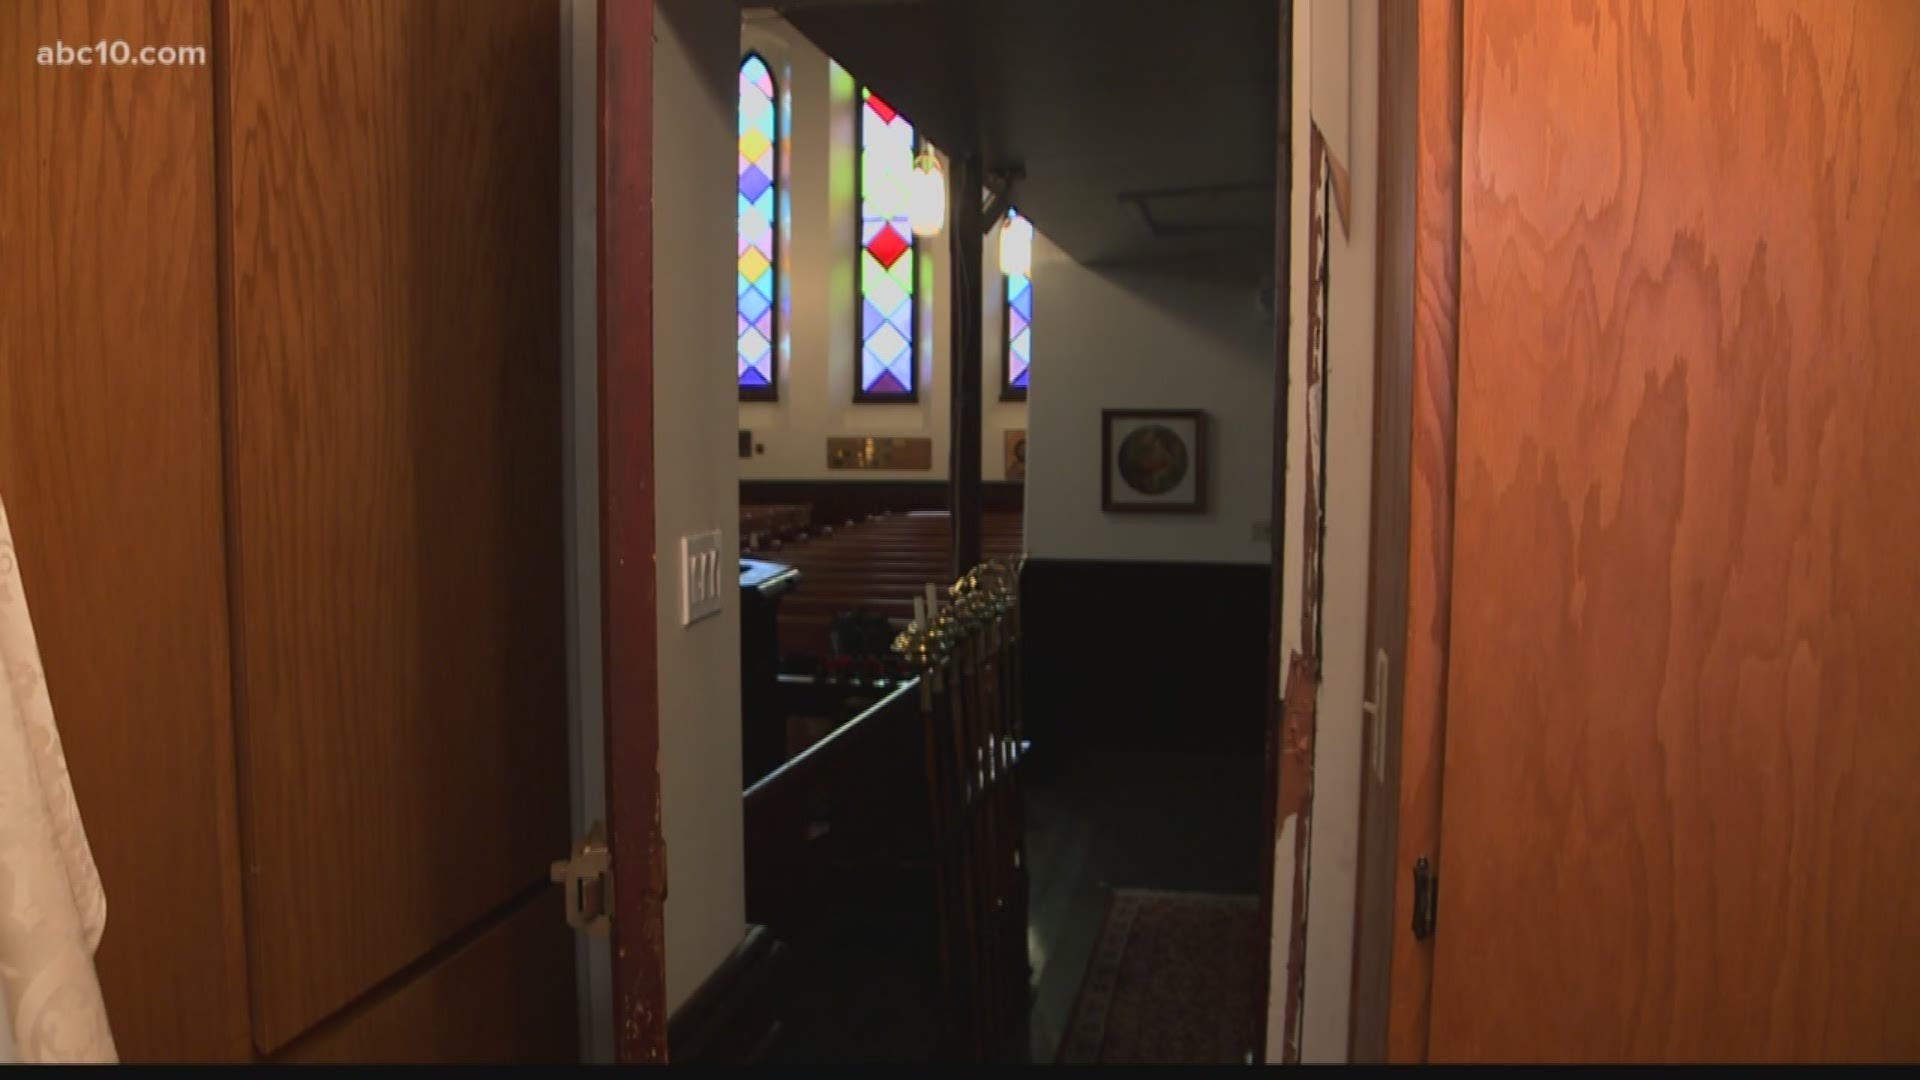 Someone broke into Episcopal Church of Placerville and stole about 38 items. Many of them date back to the 1800's when the church was built.